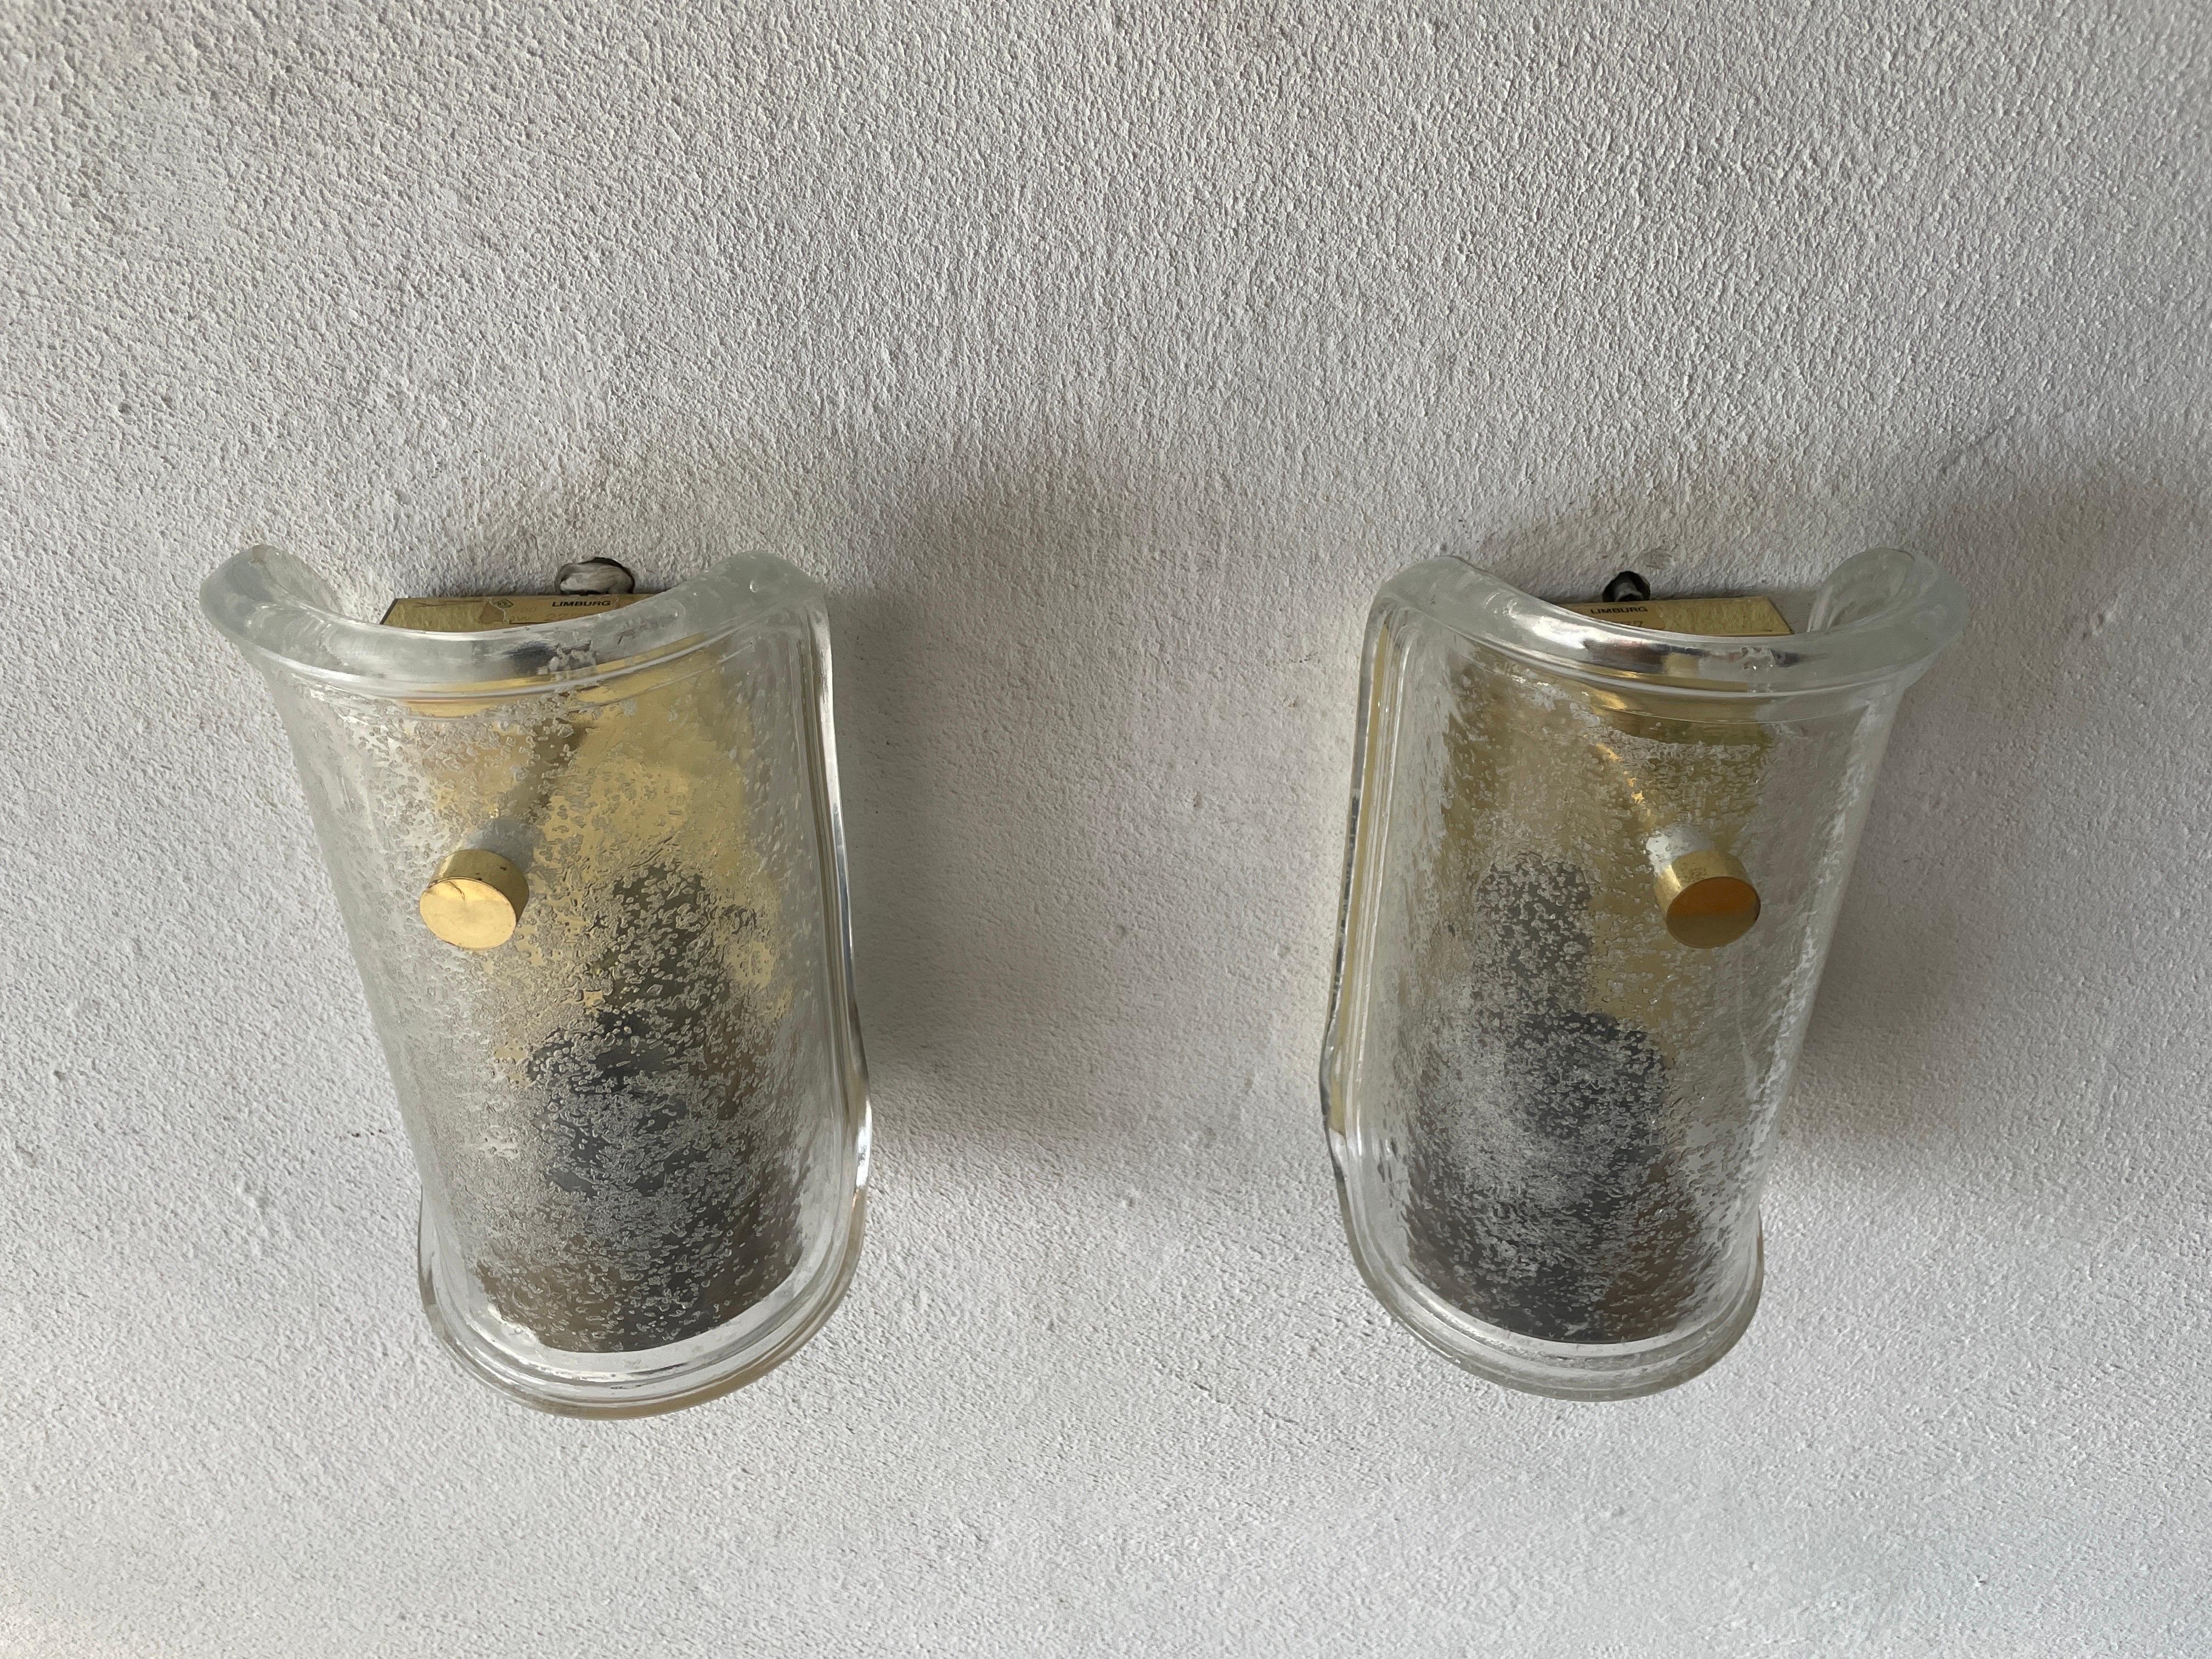 Luxury ice glass and brass pair of sconces by Limburg, 1960s, Germany

Very elegant and Minimalist wall lamps

Lamps are in very good condition.

These lamps works with E27 standard light bulbs. 
Wired and suitable to use in all countries.